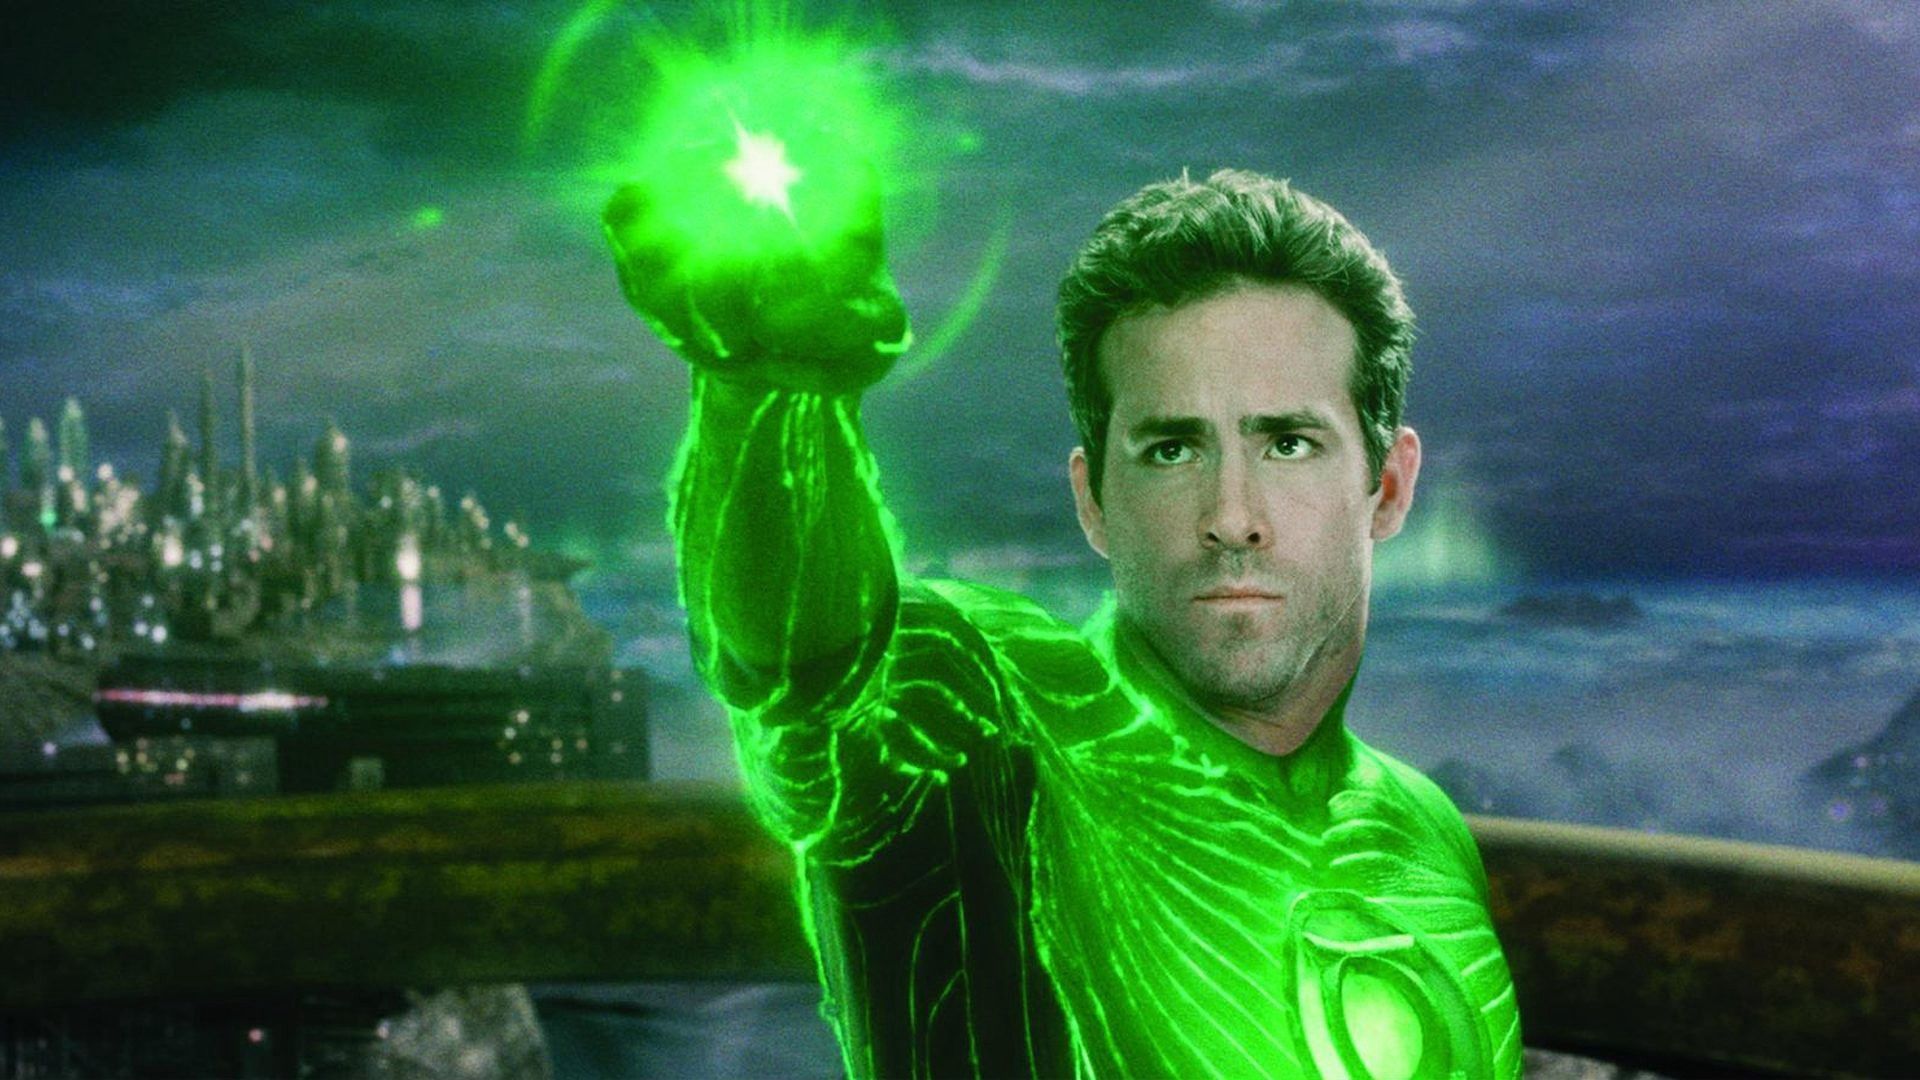 Green Lantern Costume Designer Explains What Really Happened With 'that' Super Suit. By Mike Battle